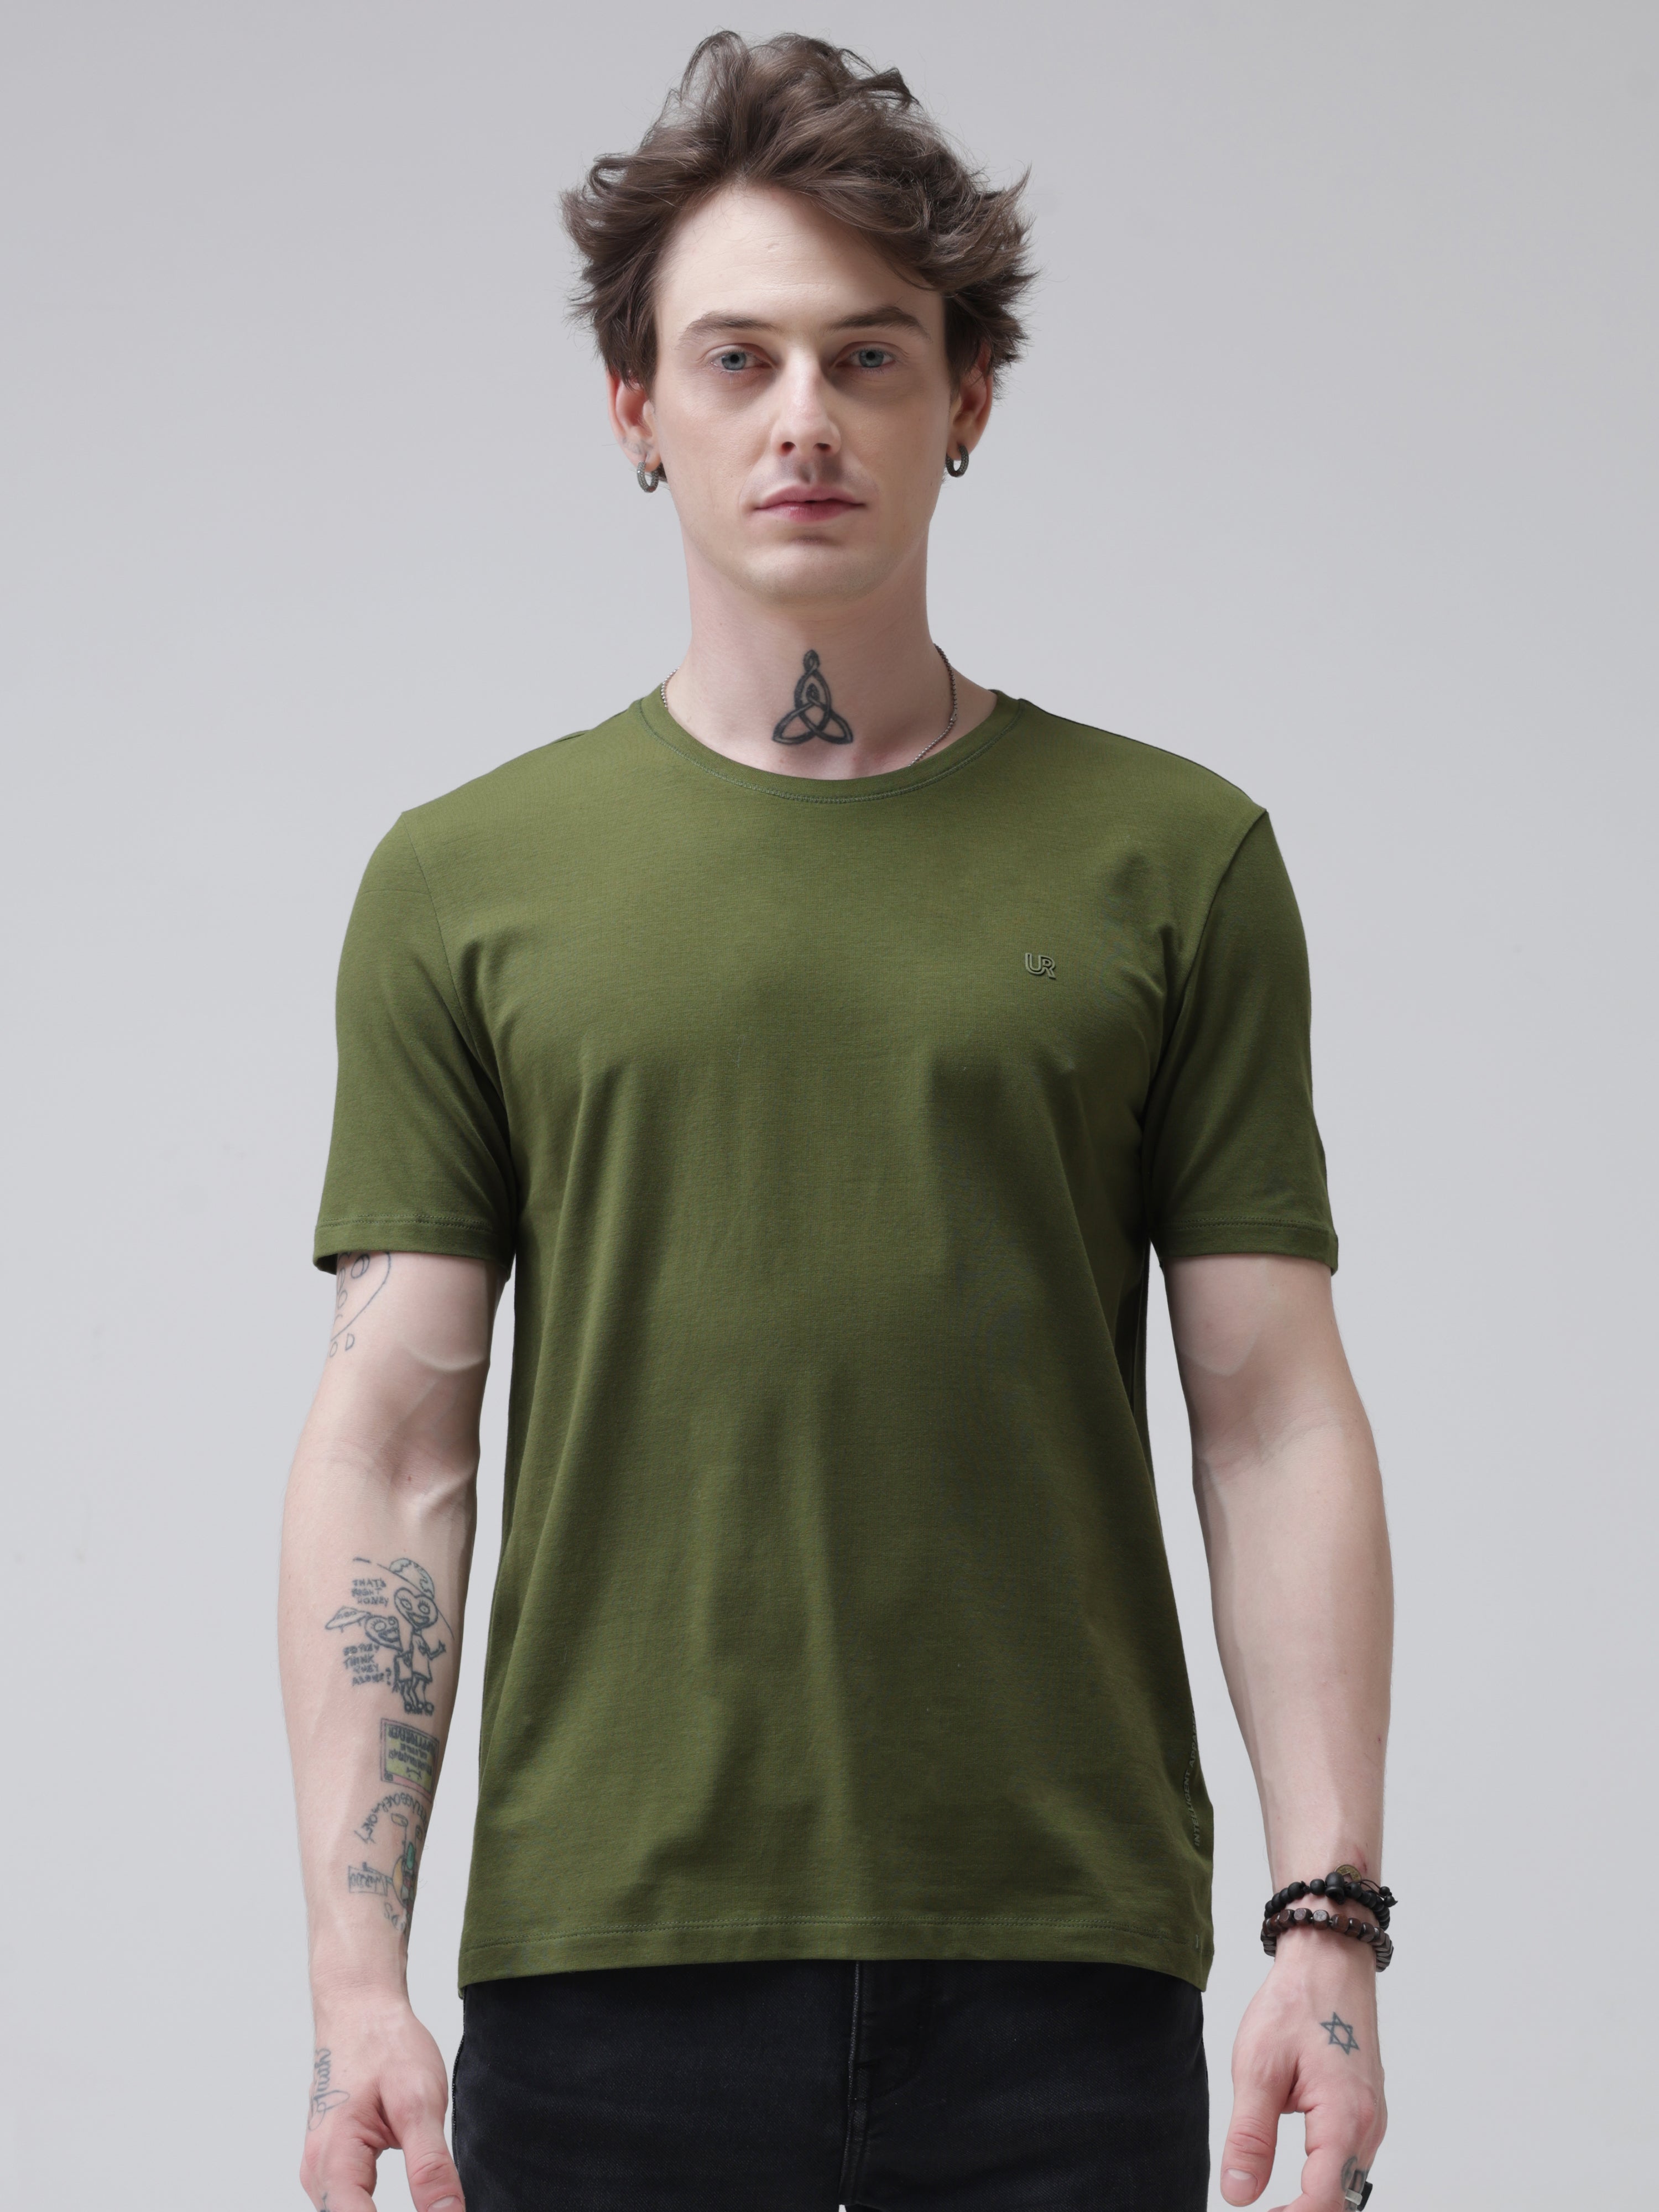 Man wearing green round-neck Turms T-shirt, stain-proof and odor-resistant with antimicrobial properties, tailored fit, made of premium cotton and spandex.